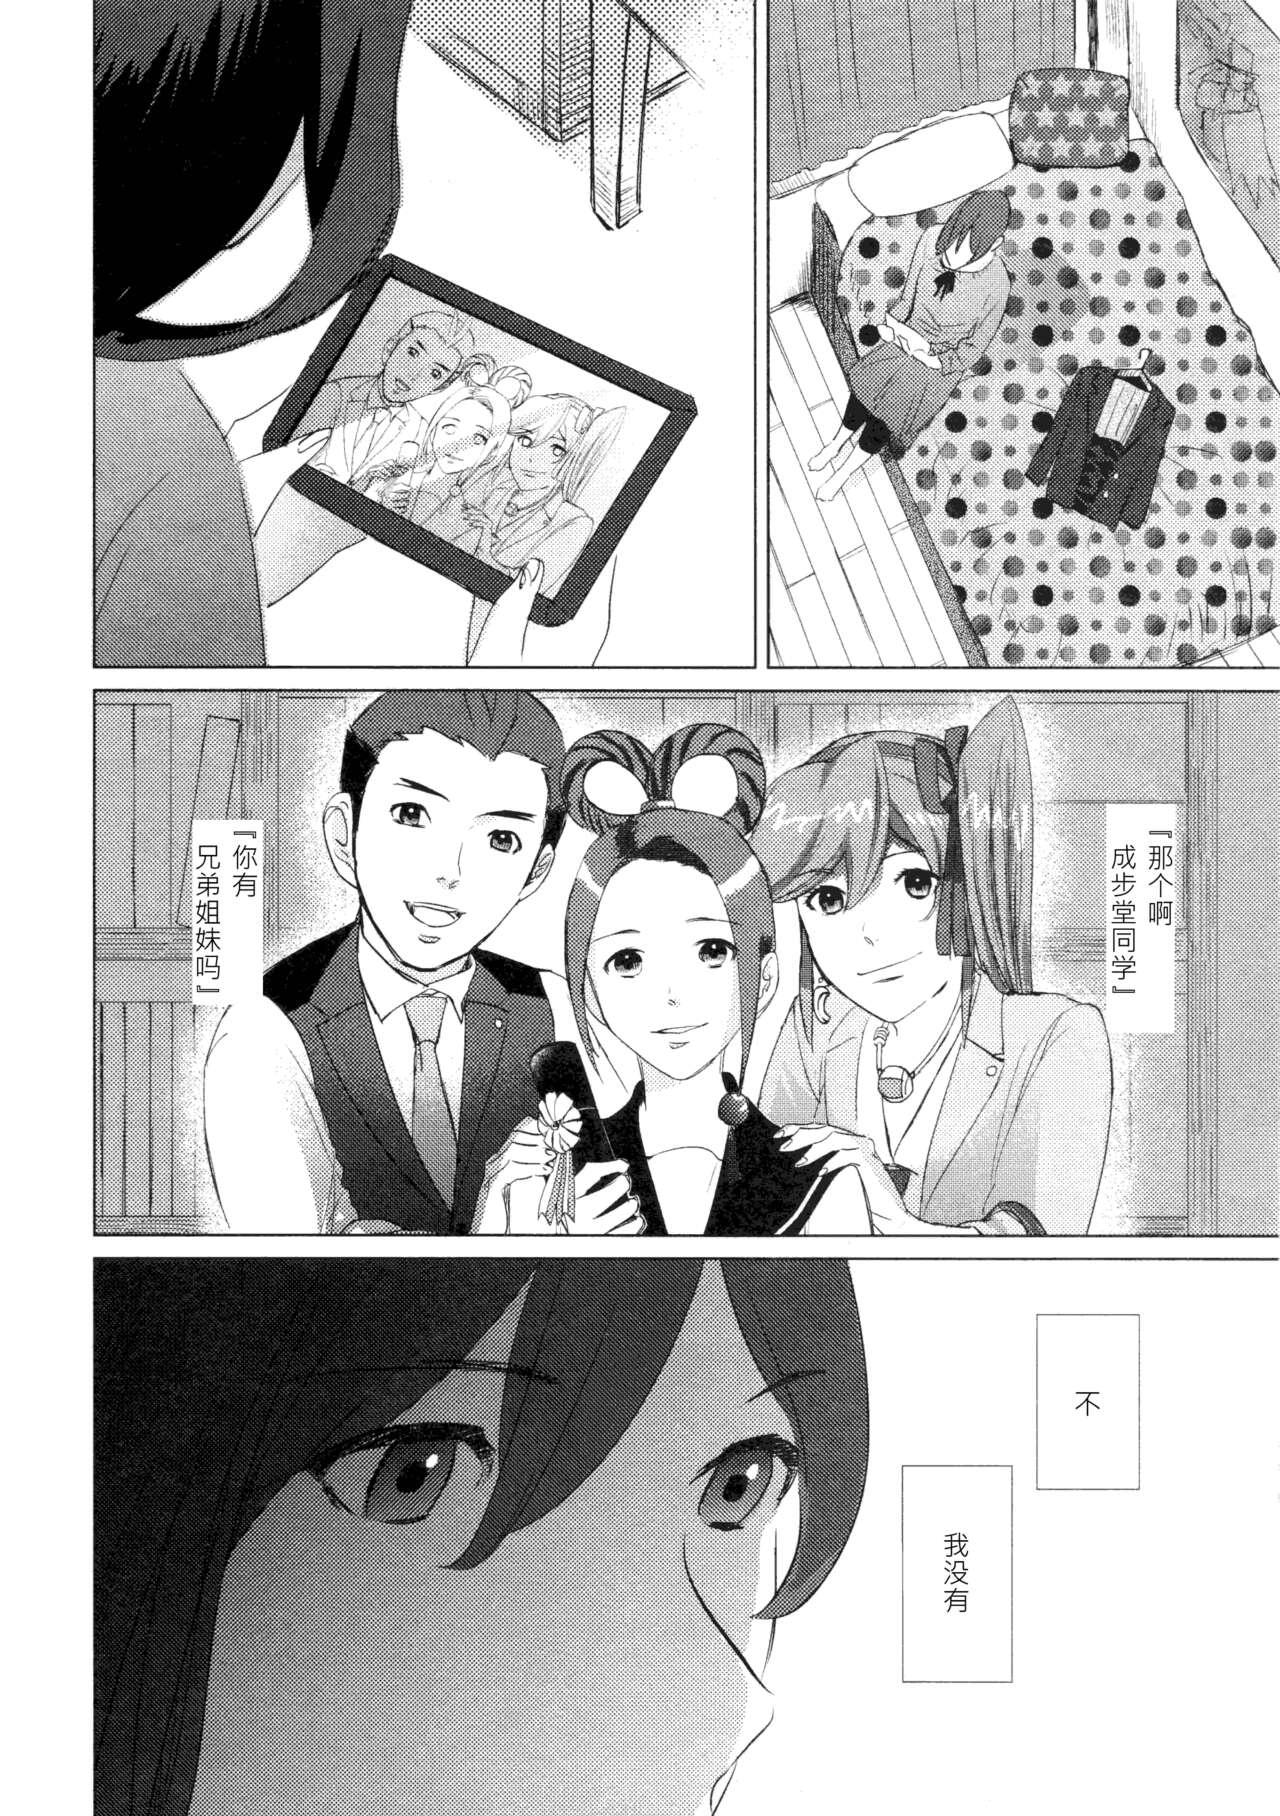 Licking Pussy Don't leave me alone,my big LITTLE brother - Ace attorney | gyakuten saiban Old - Page 9